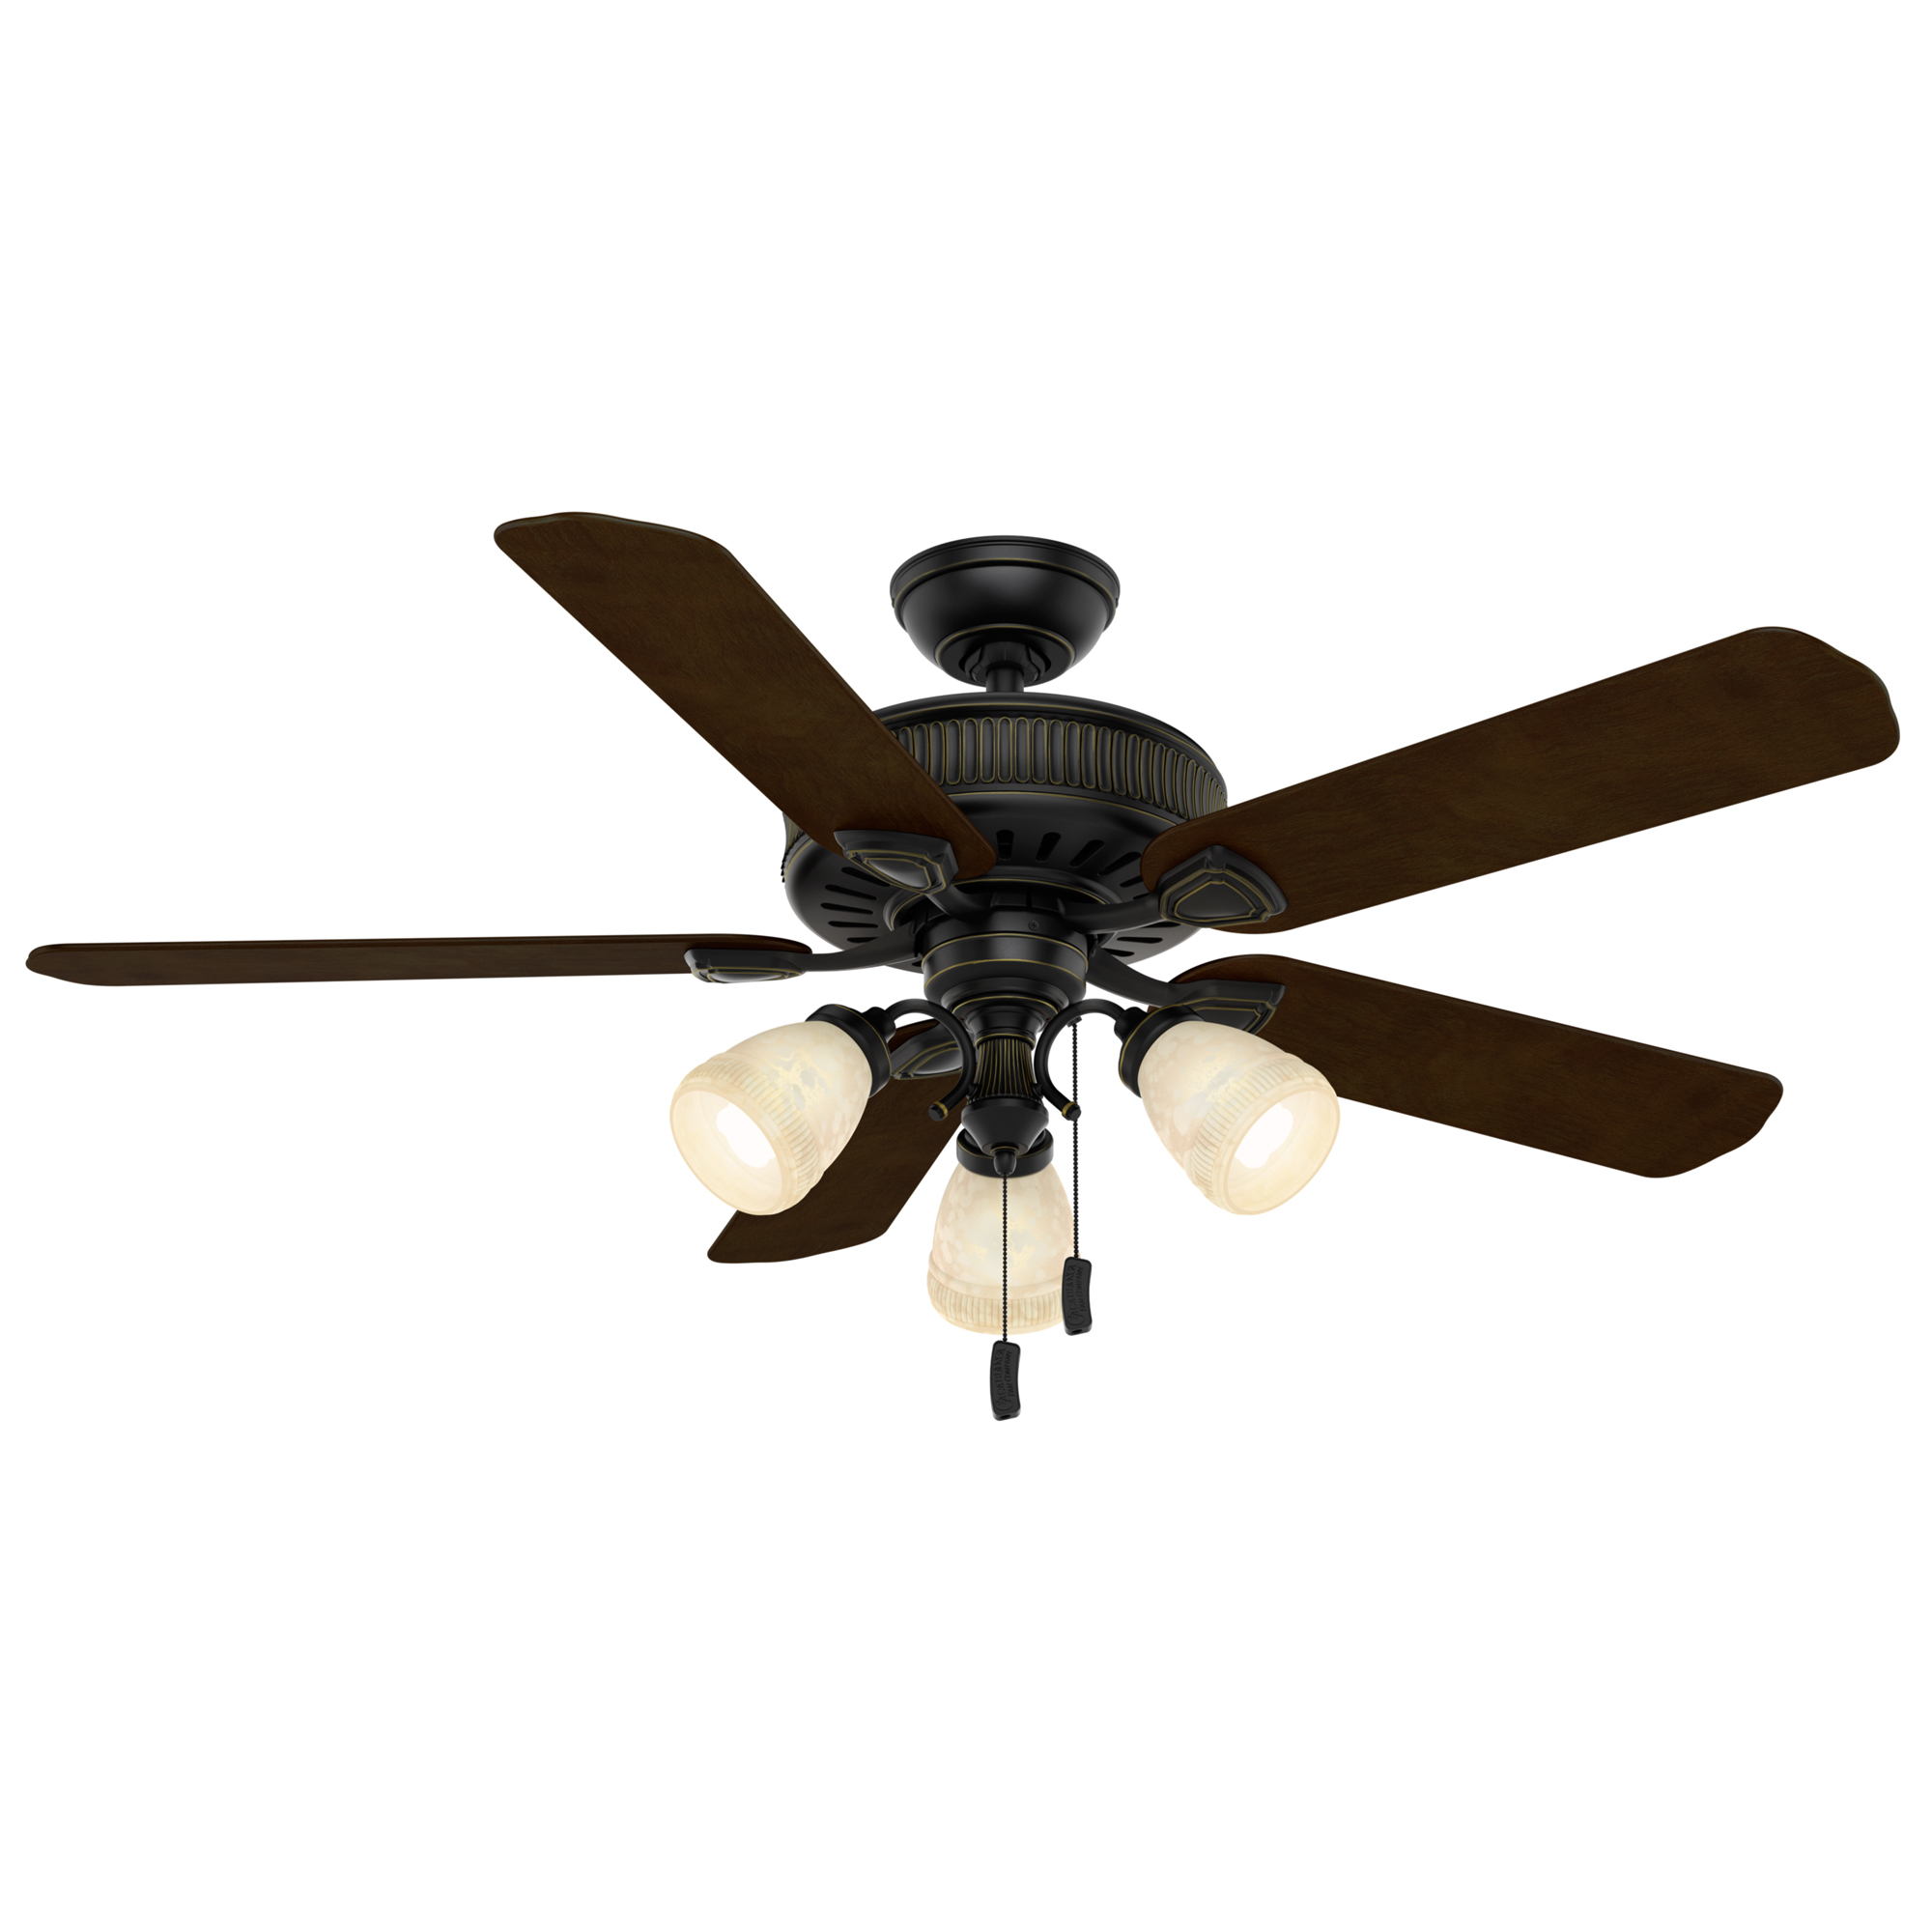 Details About Casablanca Ainsworth 54 Inch Indoor Ceiling Fan W Light Kit Pull Chain Black